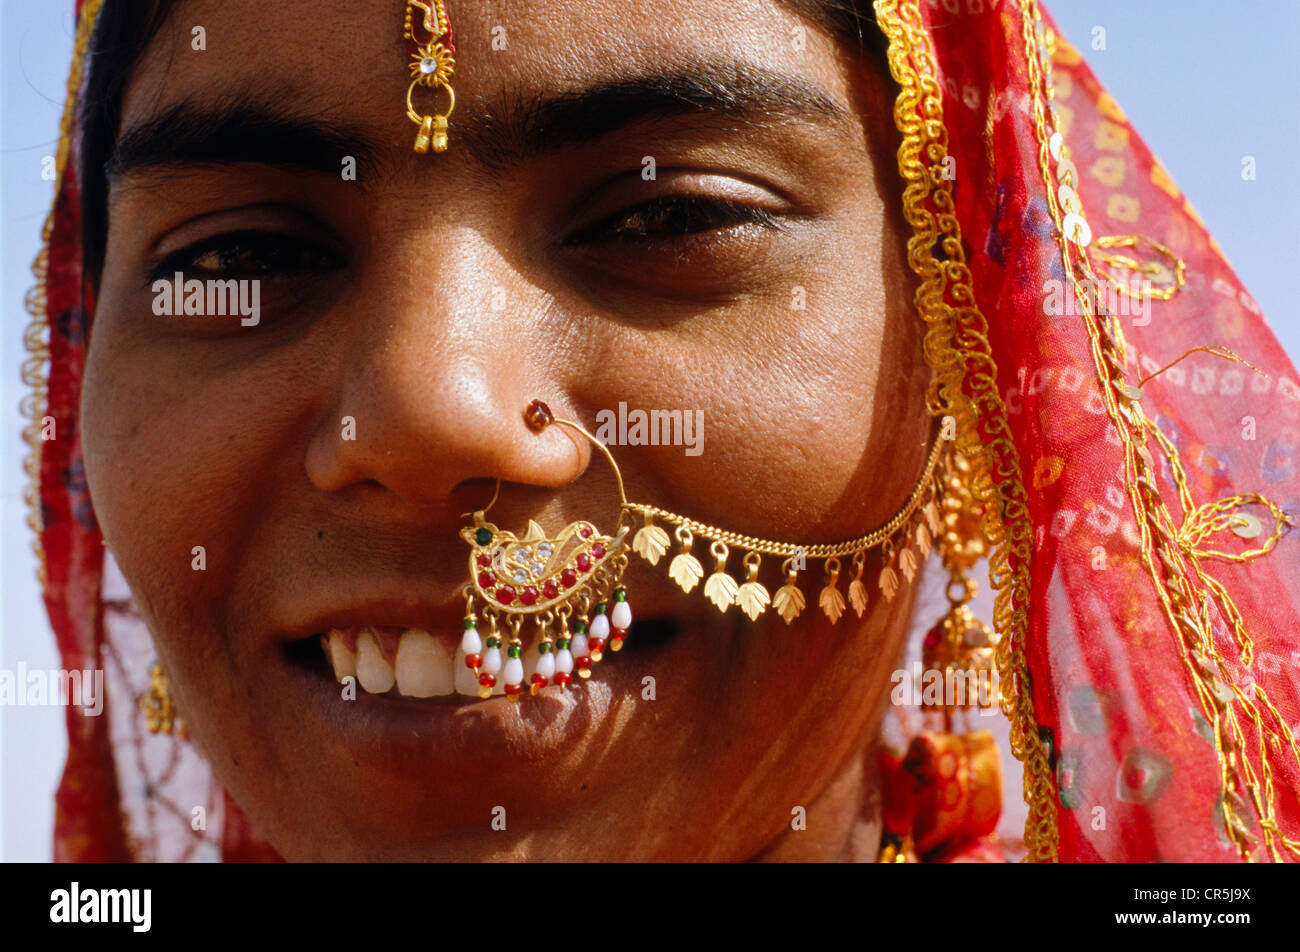 Indian woman with jewellery worn for special occasions like weddings, Jaisalmer, Rajasthan, India, Asia Stock Photo